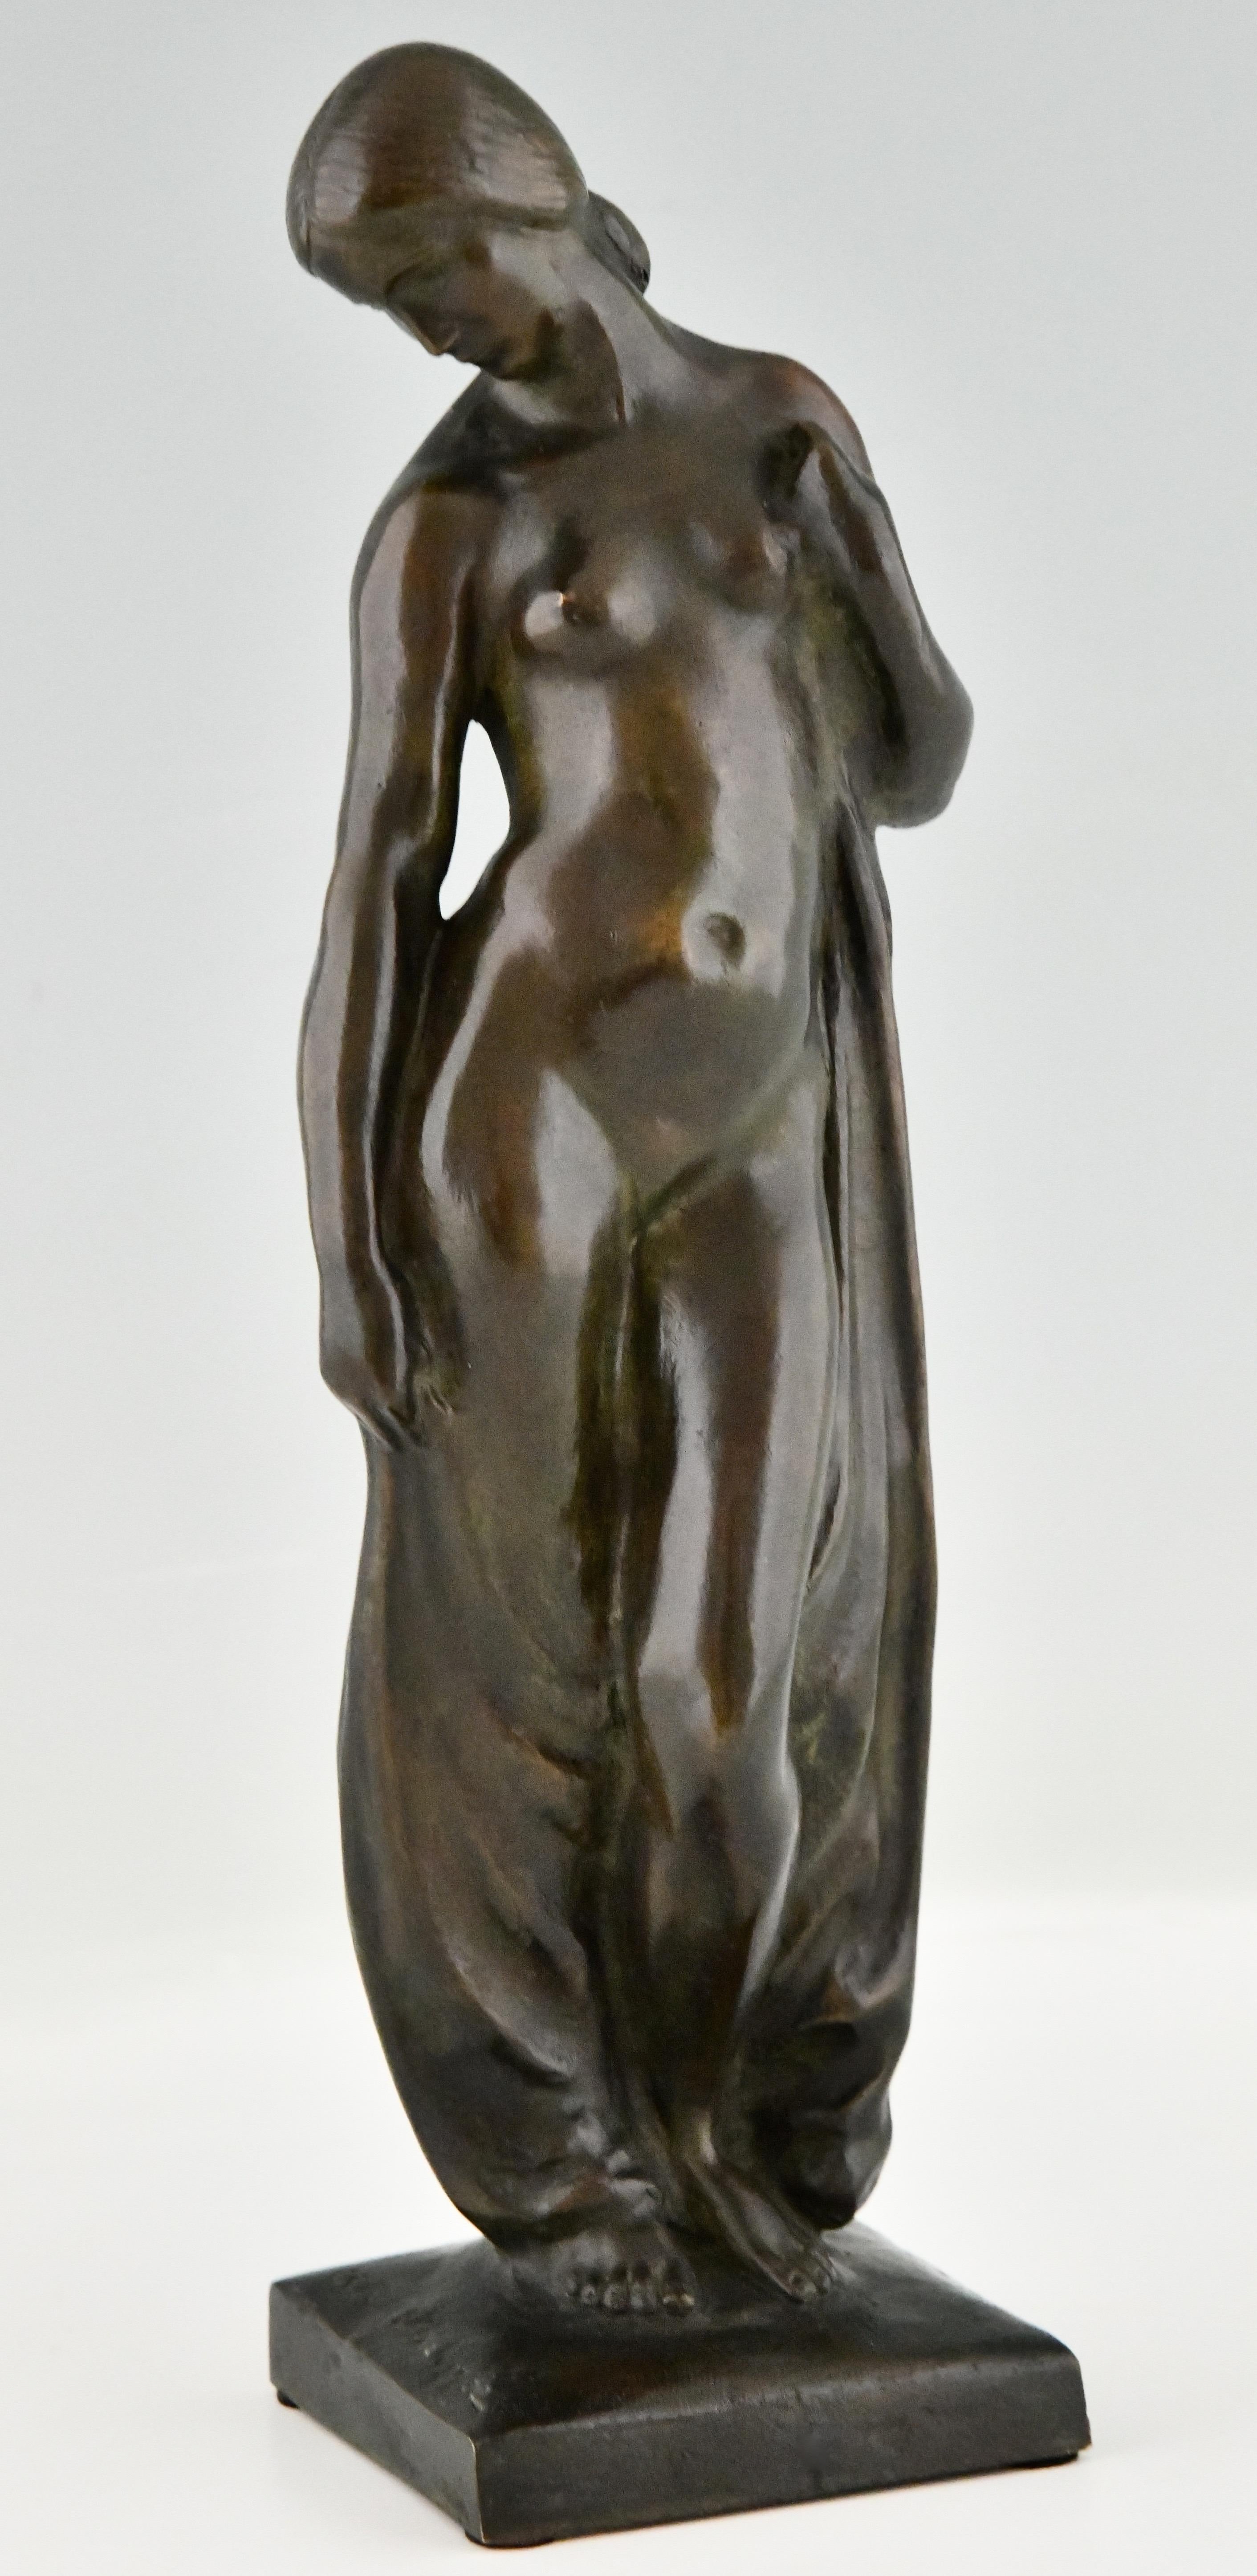 Art Deco bronze sculpture nude with drape signed by Abel.R. Philippe. 
With foundry mark of Meroni Radice, marked cire perdue, lost wax technique. 
The bronze has a beautiful patina. 
France 1925.